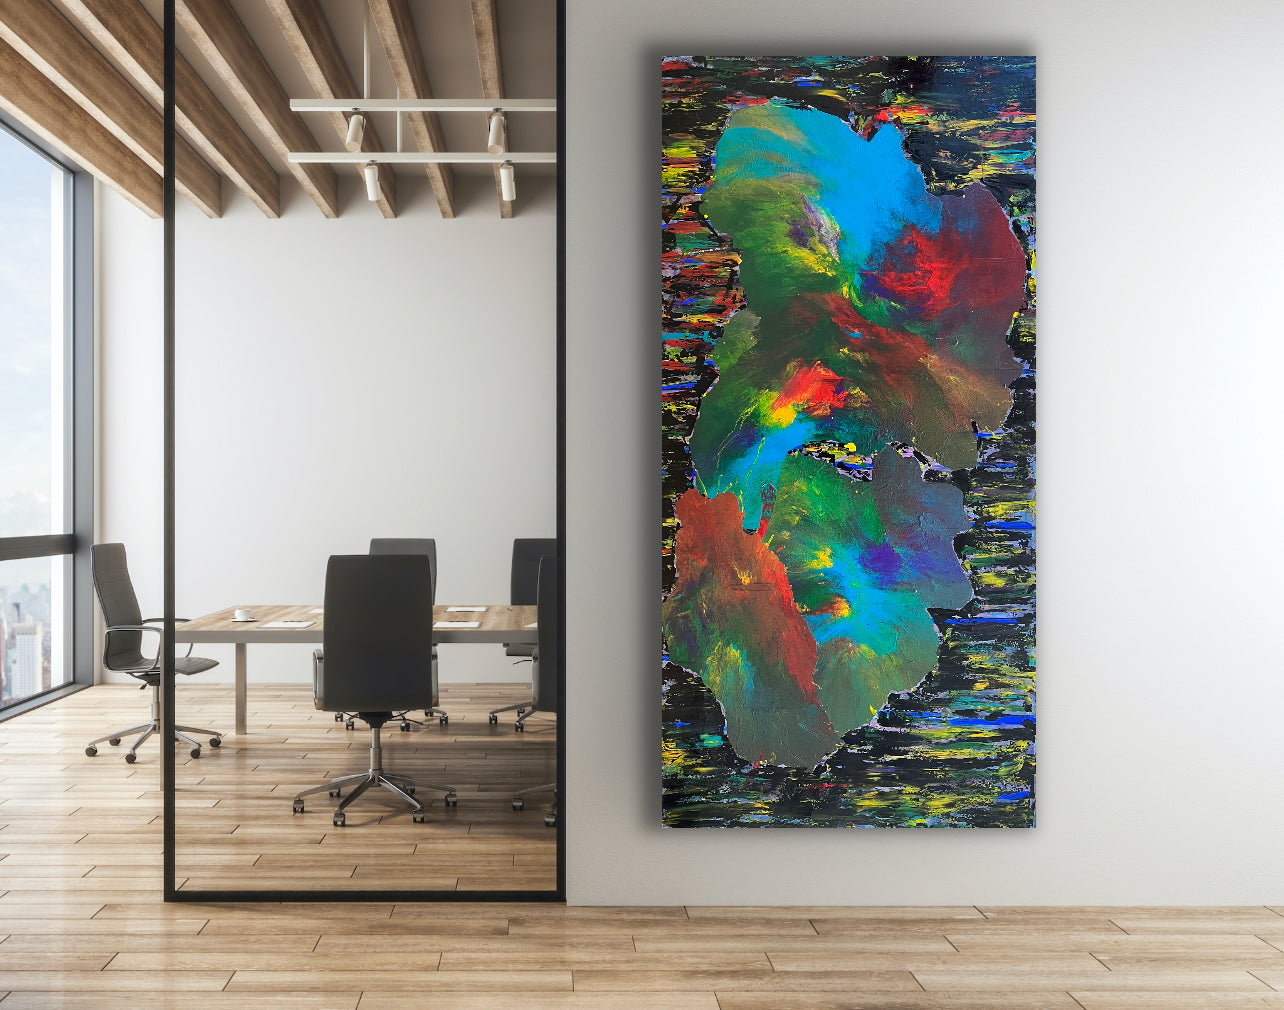 Galactic Sky (91 cm x 182 cm)Textured Abstract Painting by Joanne Daniel